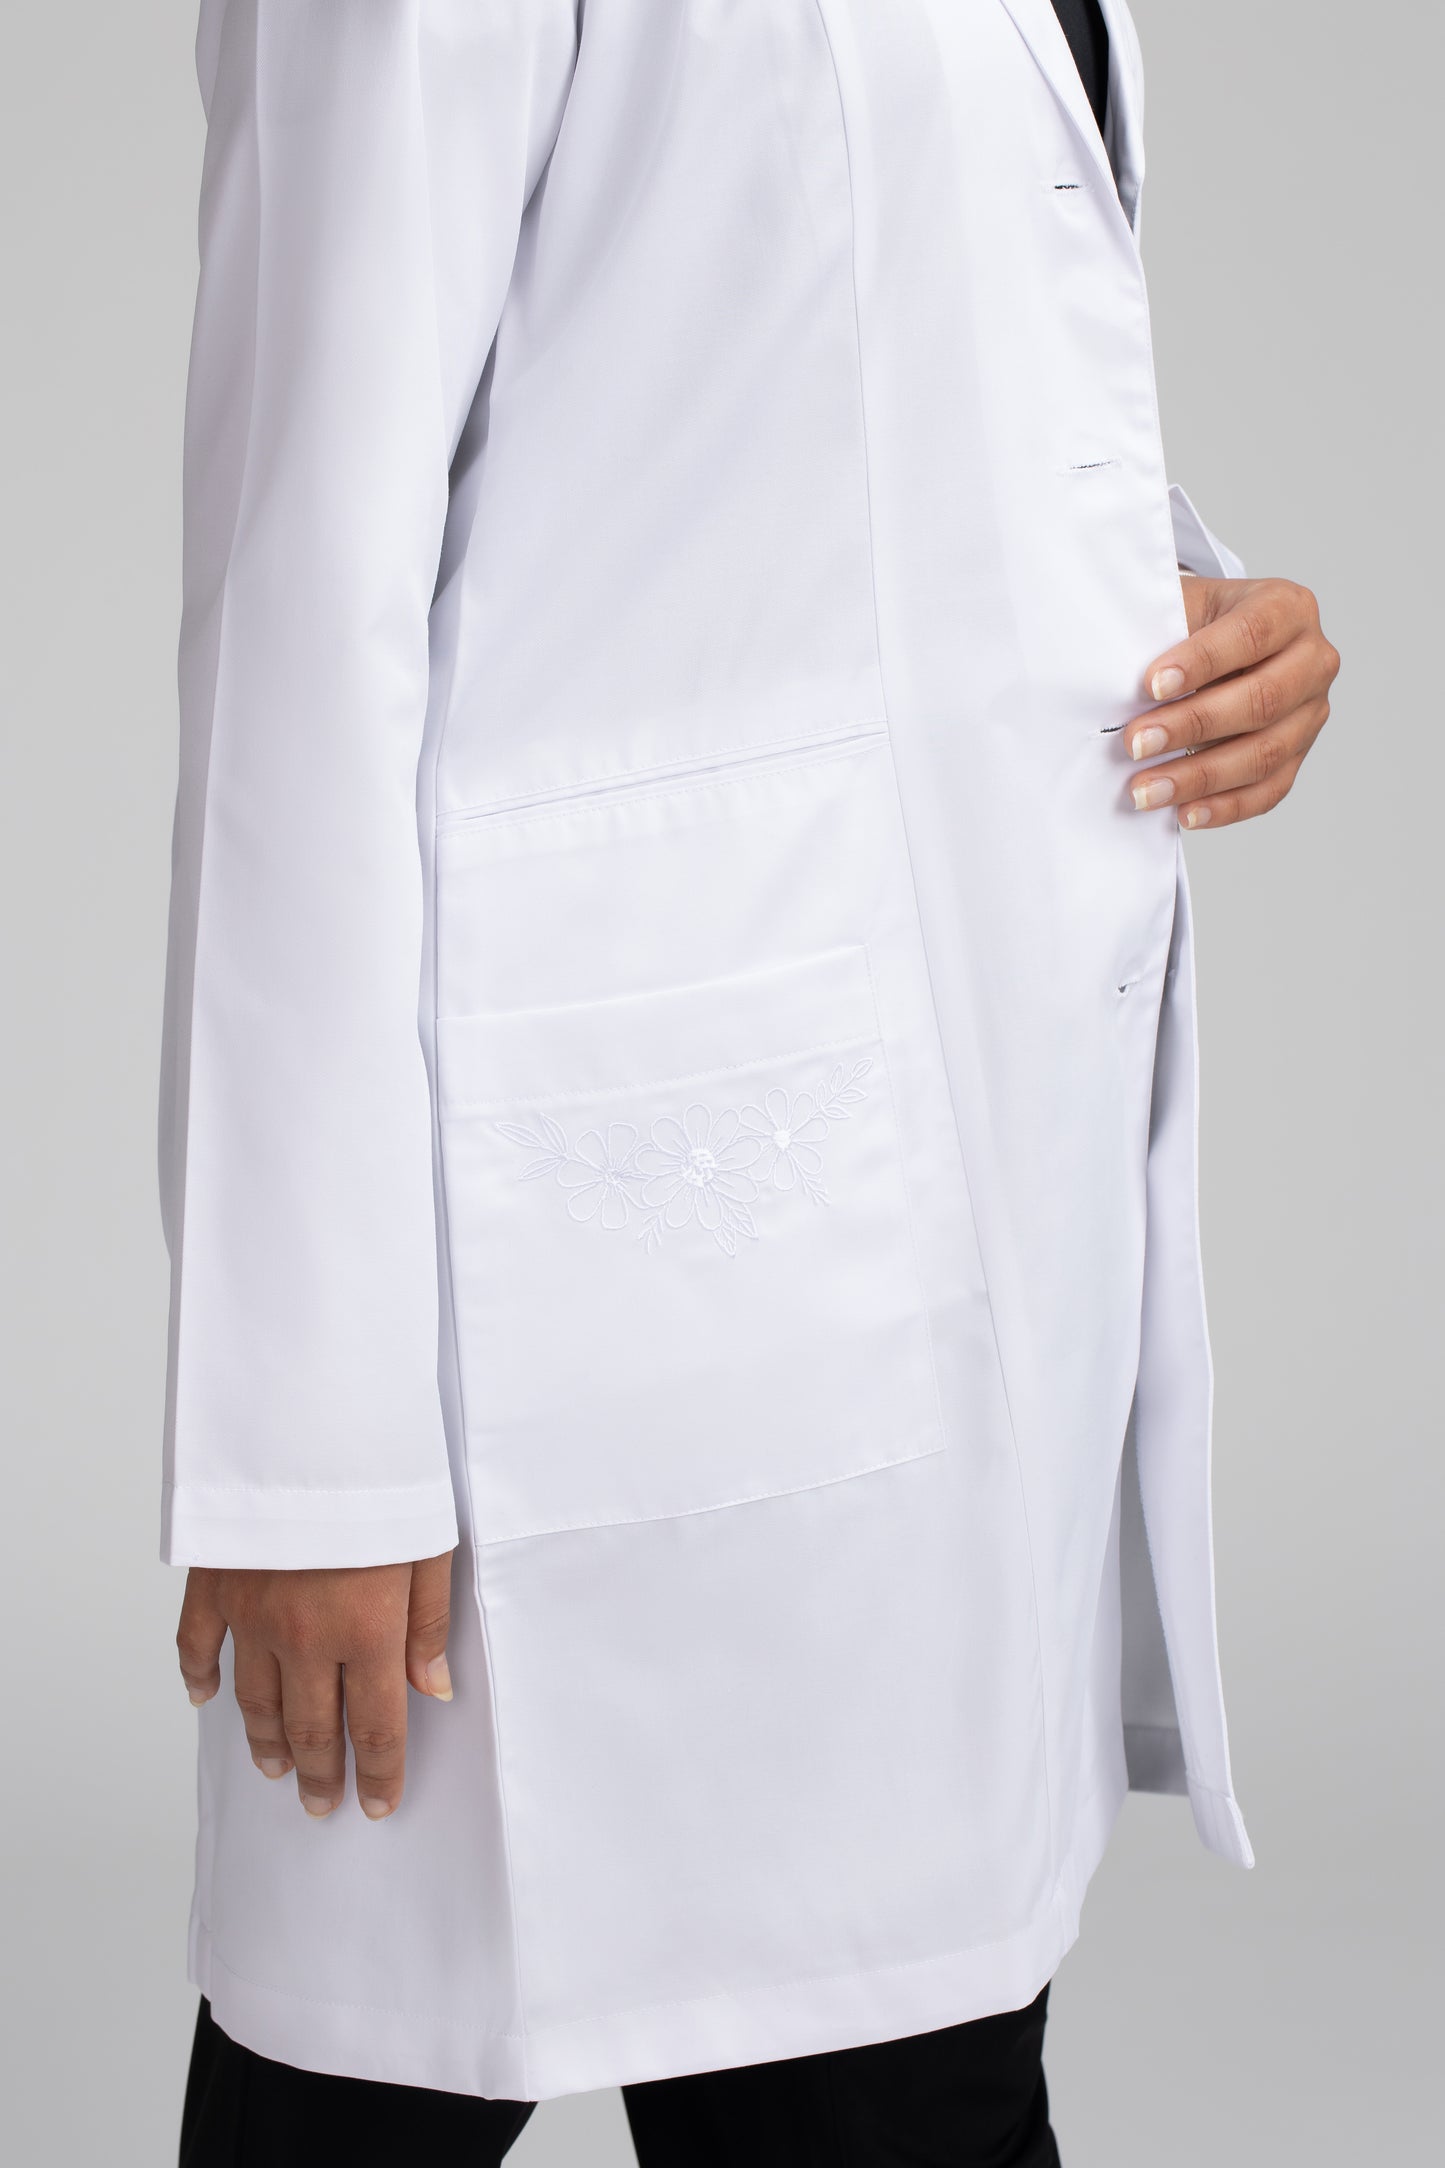 Narjes Women's Embroidered Labcoat